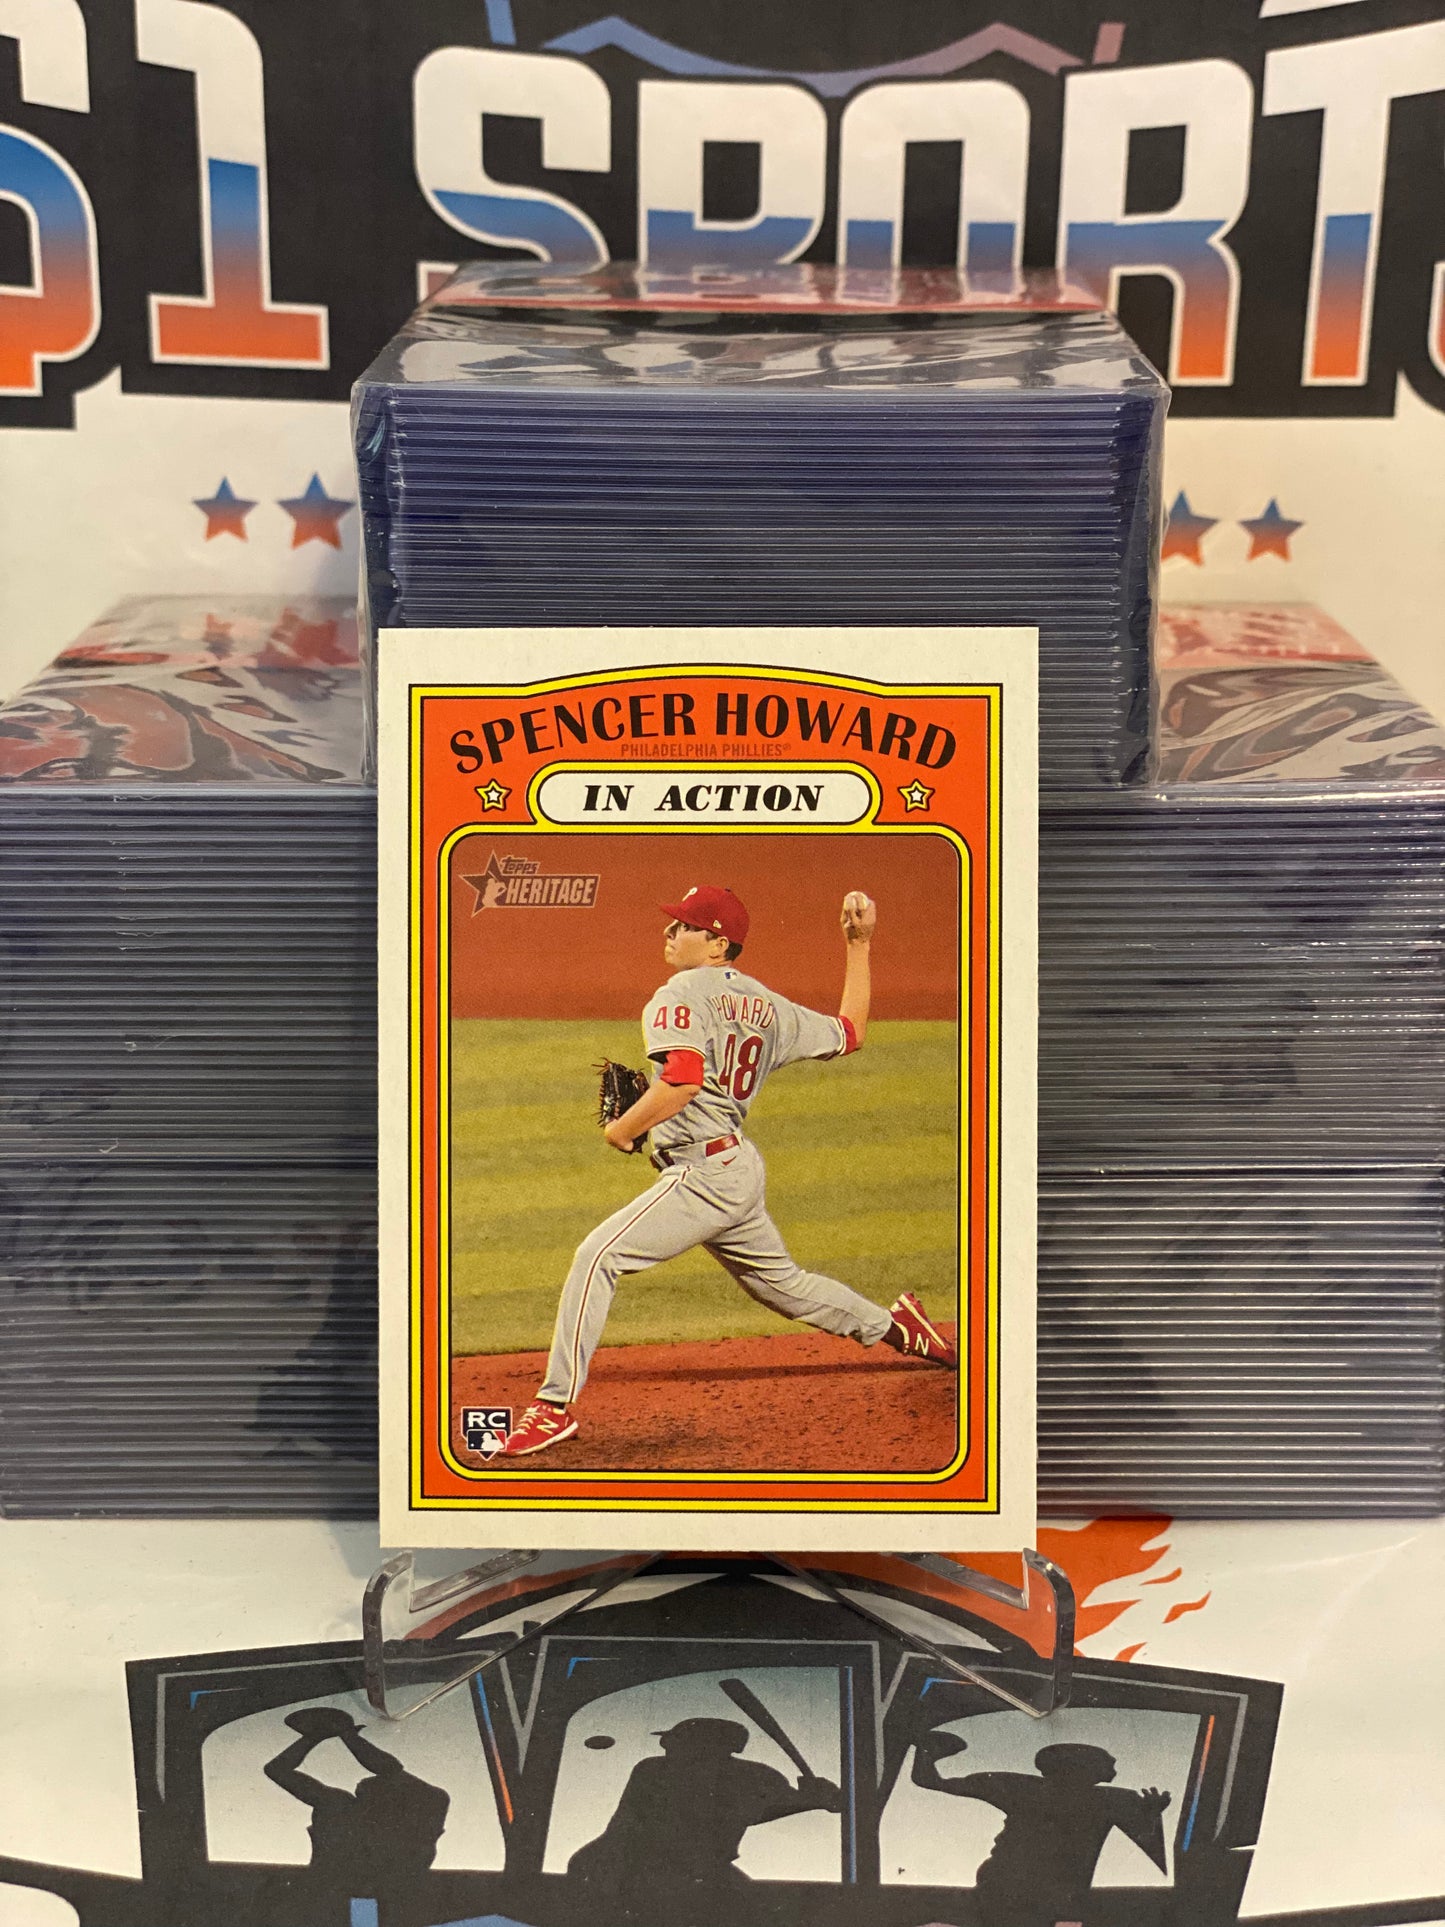 2021 Topps Heritage (In Action) Spencer Howard Rookie #106